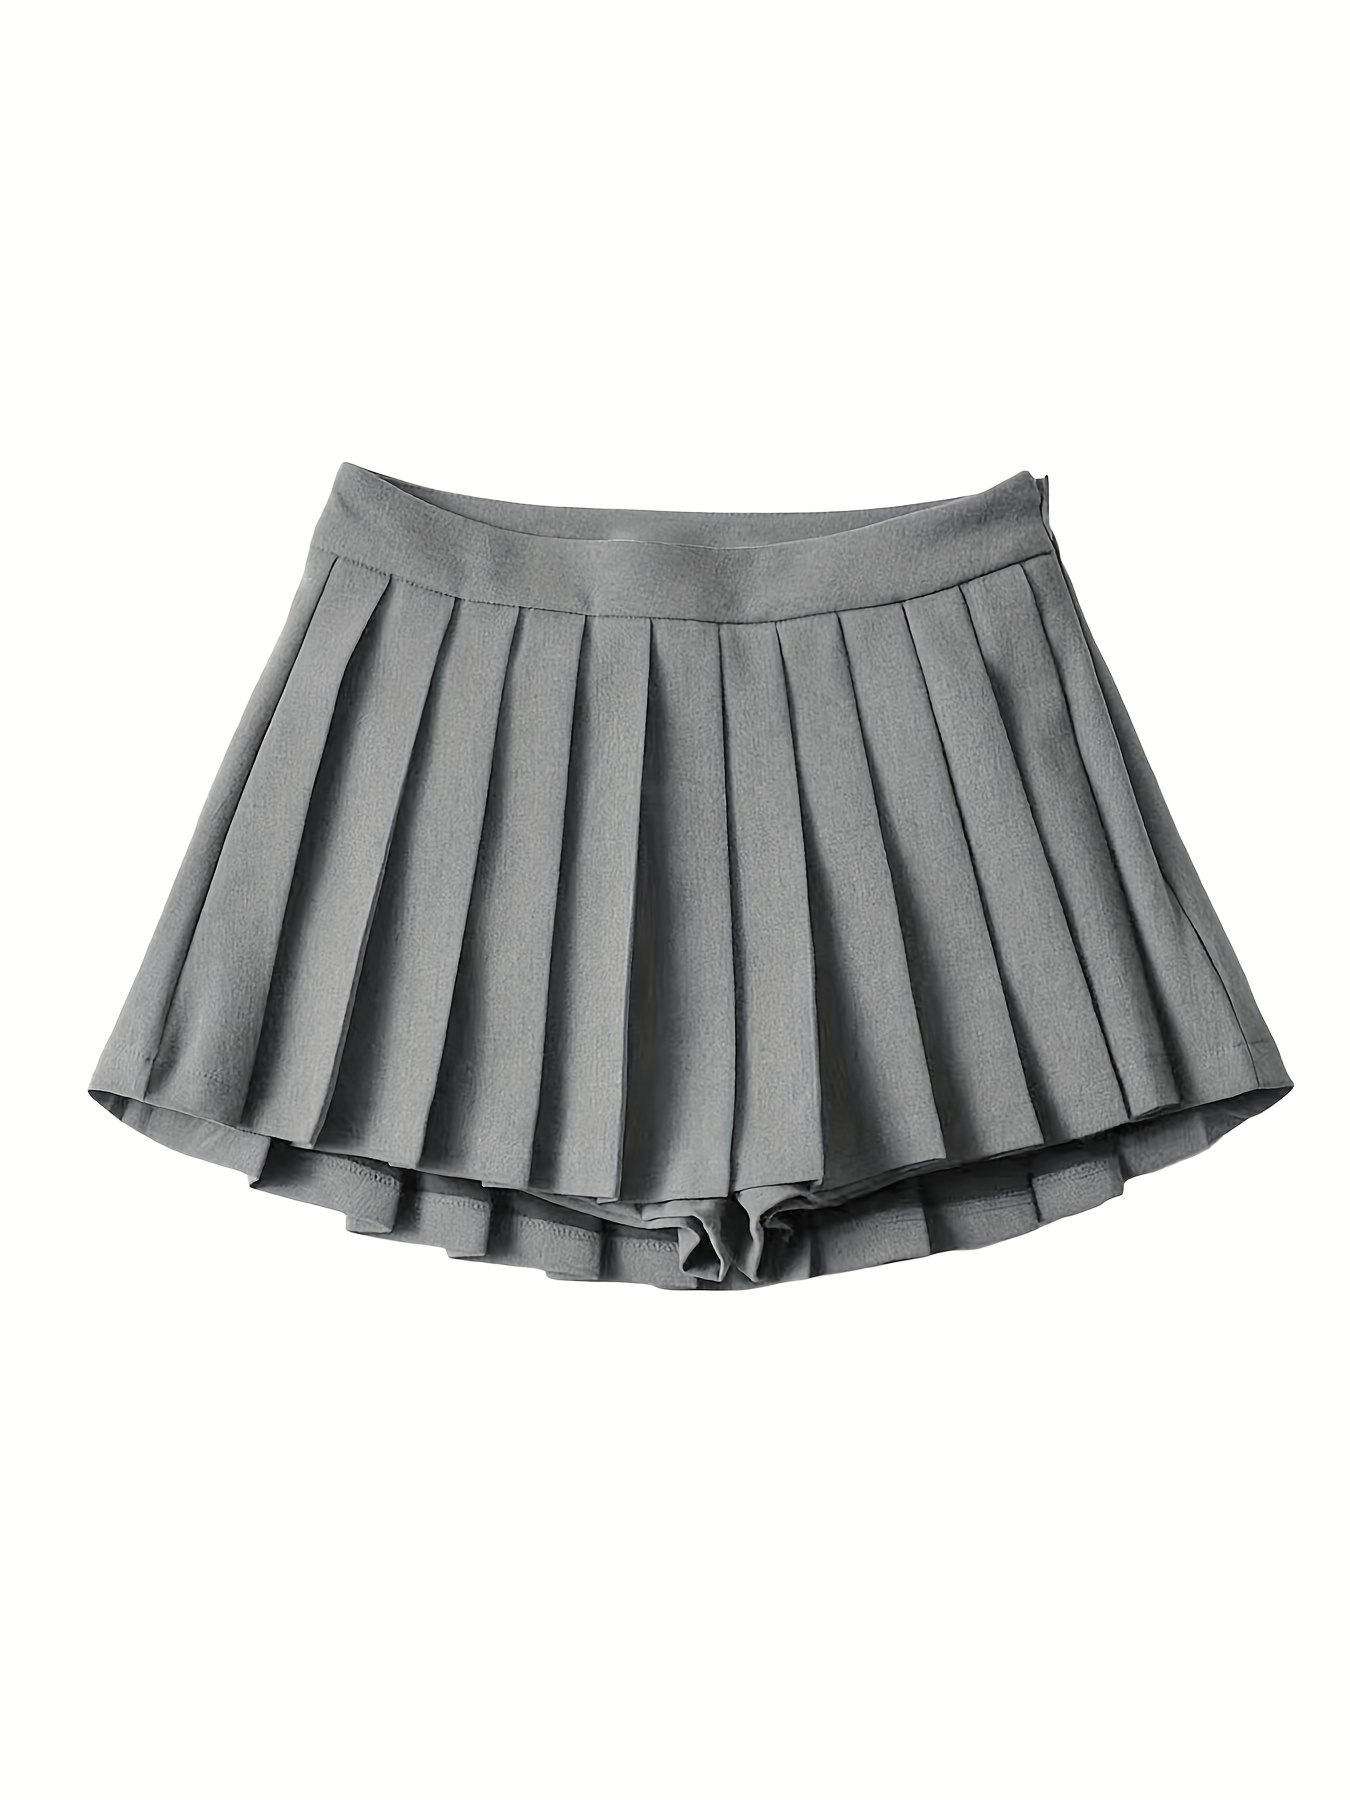 Space Dye Gray A-Line Style Athletic Skirt with Built-in Leggings – The  Skirt Lady